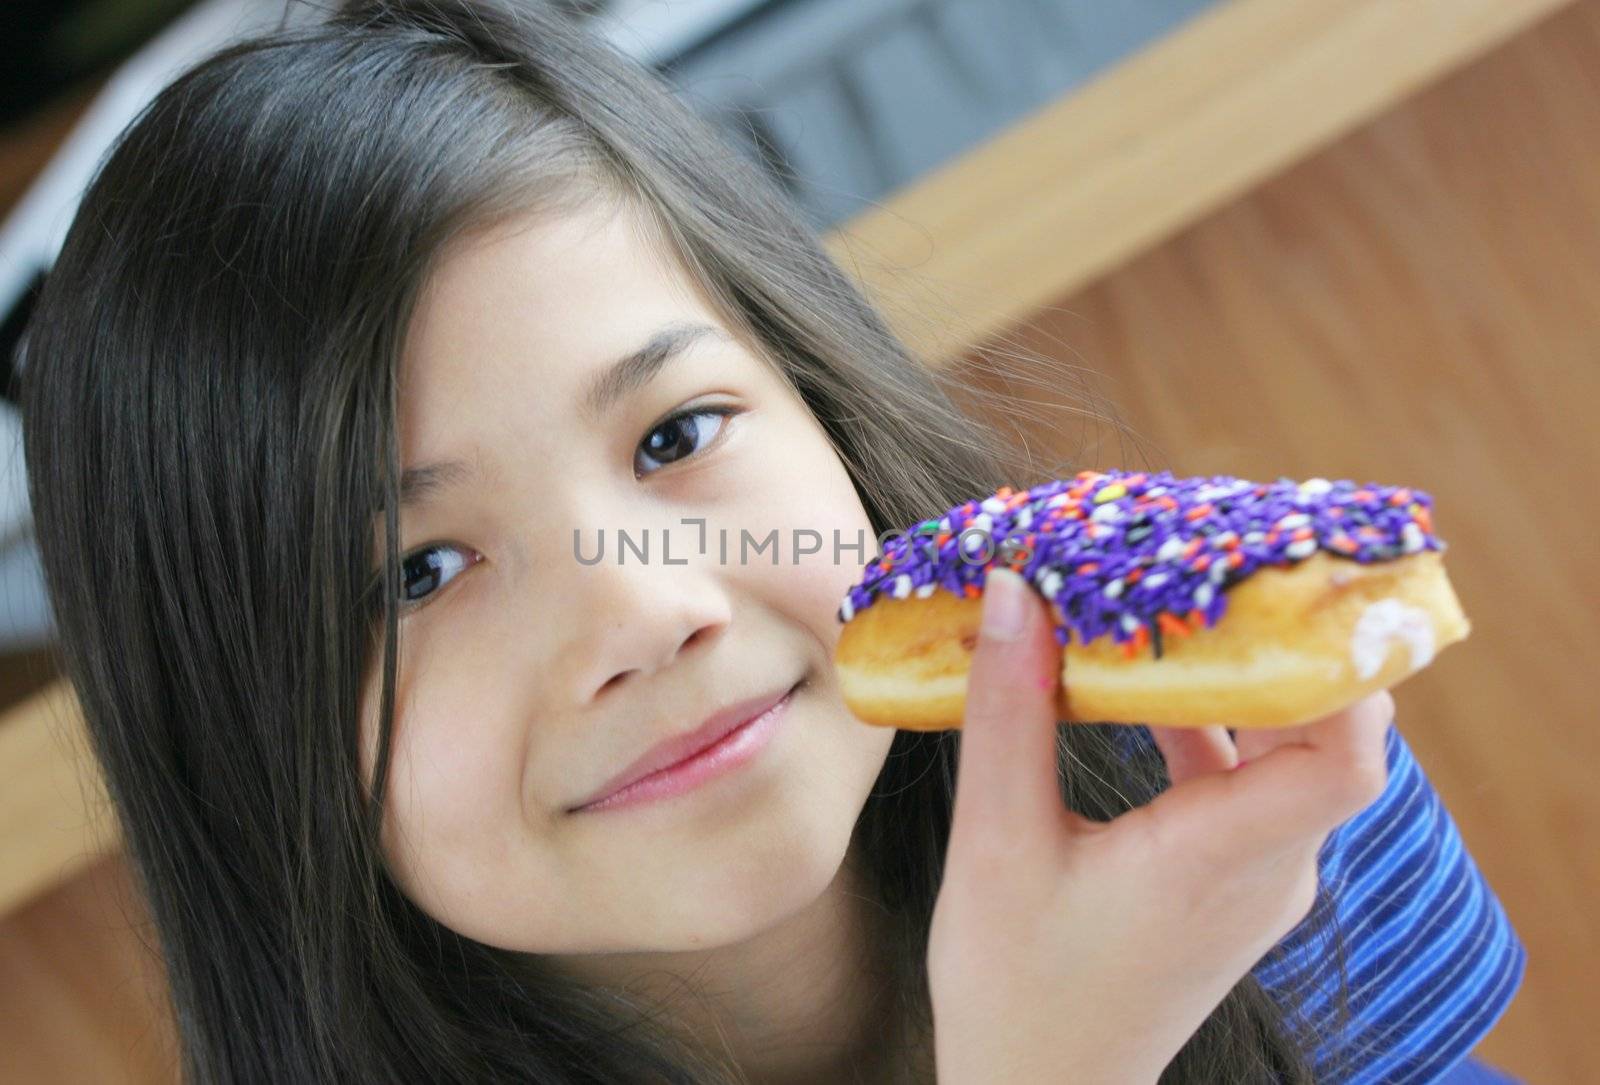 Girl holding colorful donut, ready to eat;